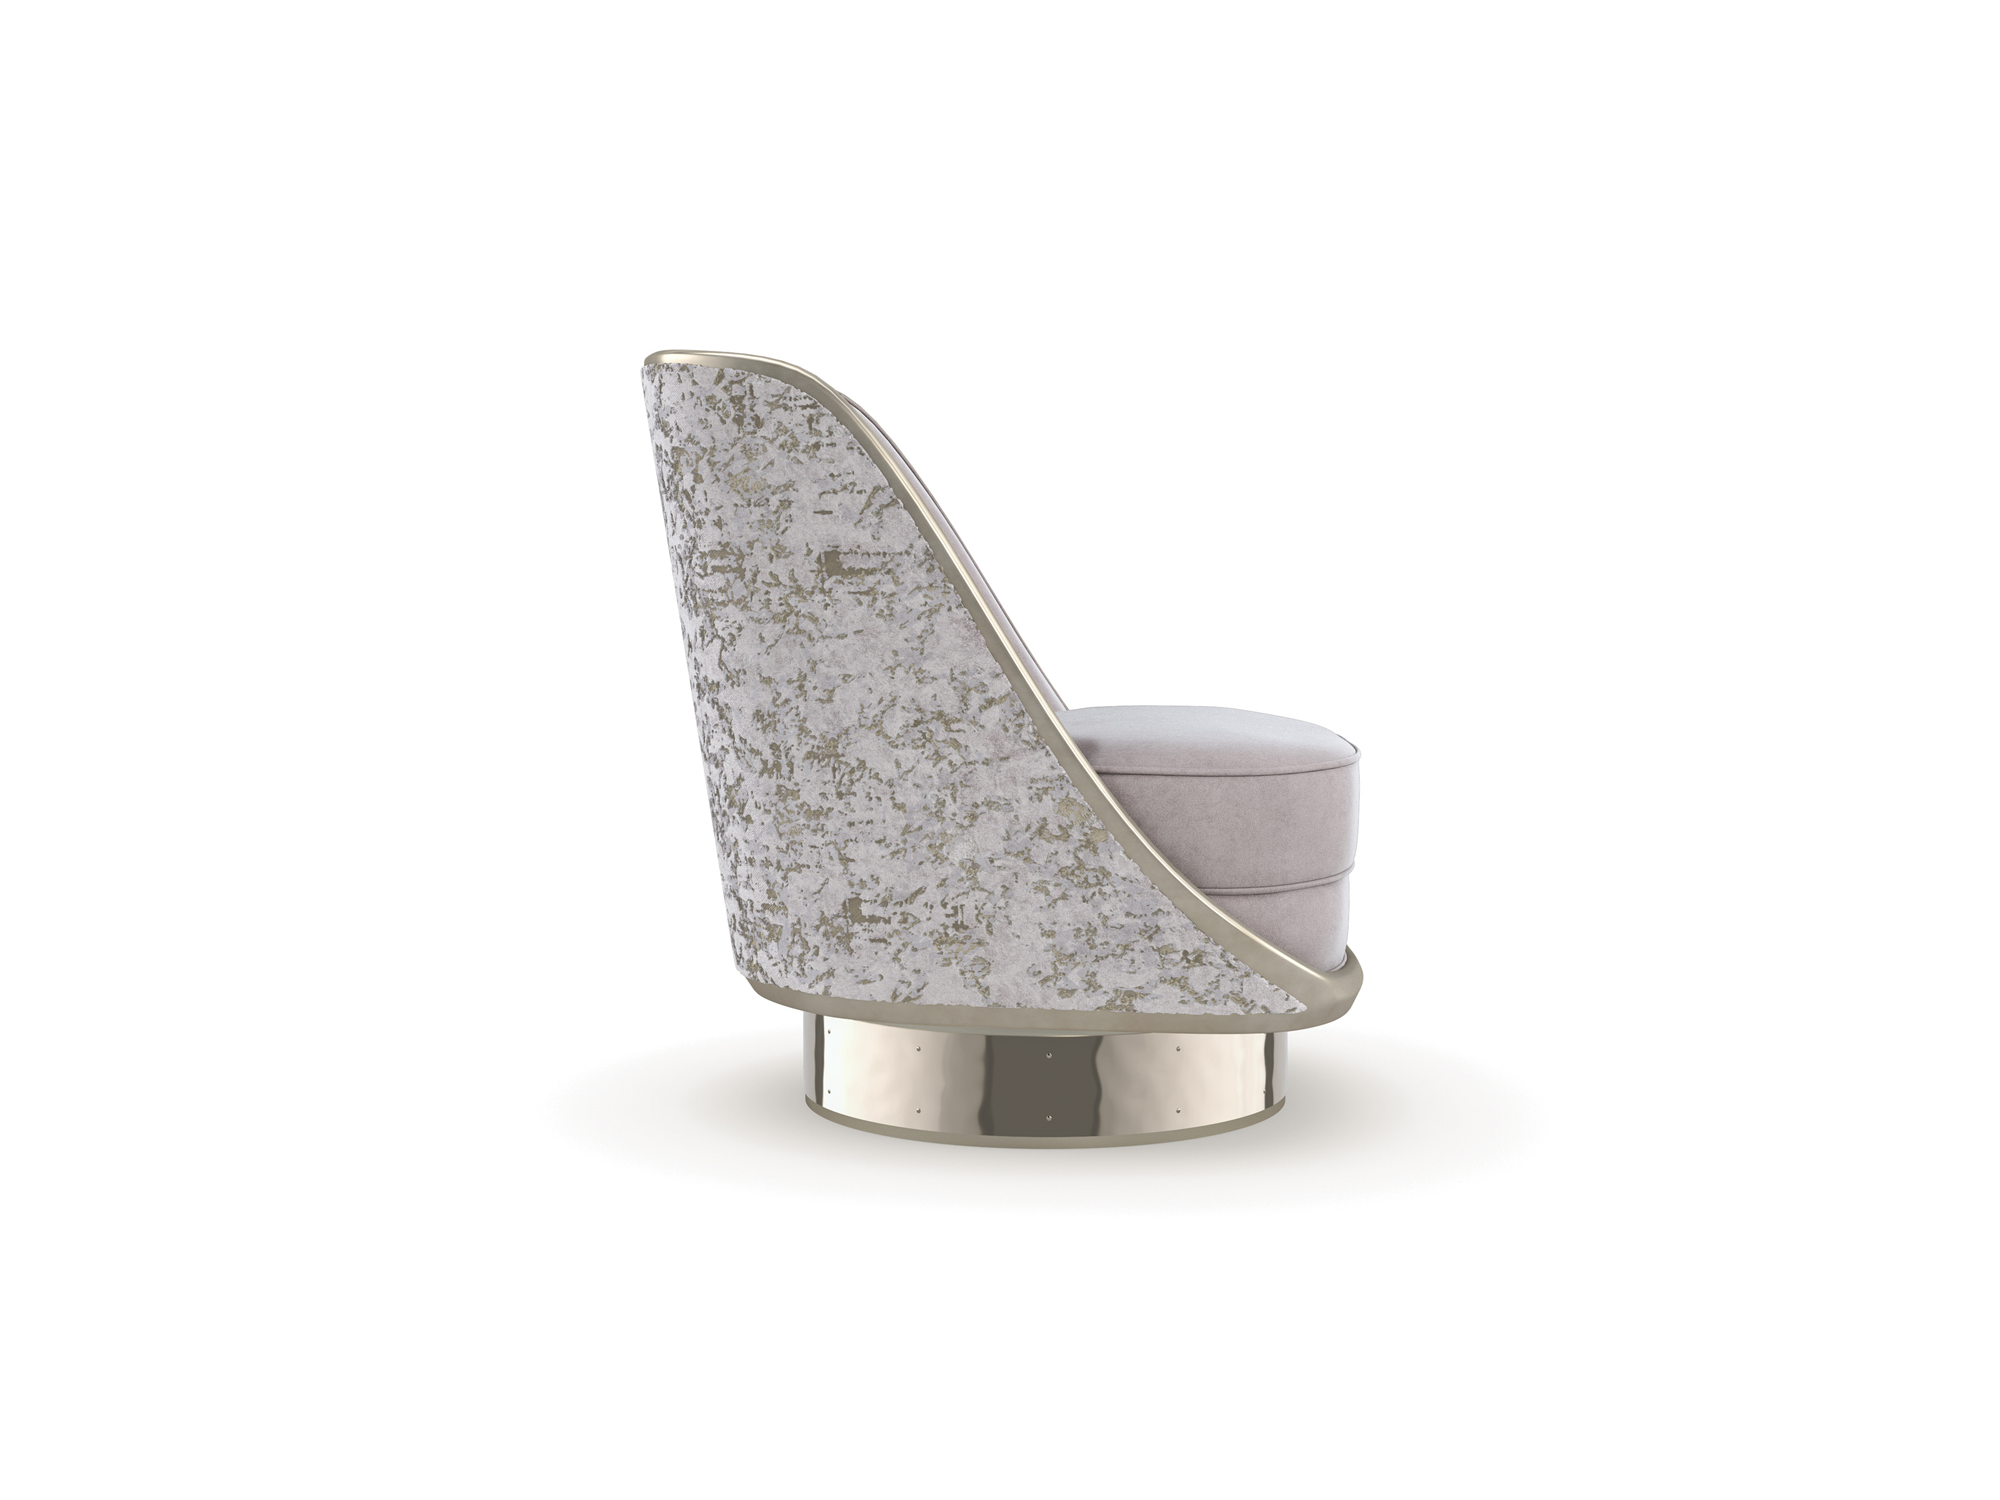 Desmond Go For a Spin Chair in Silver Shadow - Euro Living Furniture